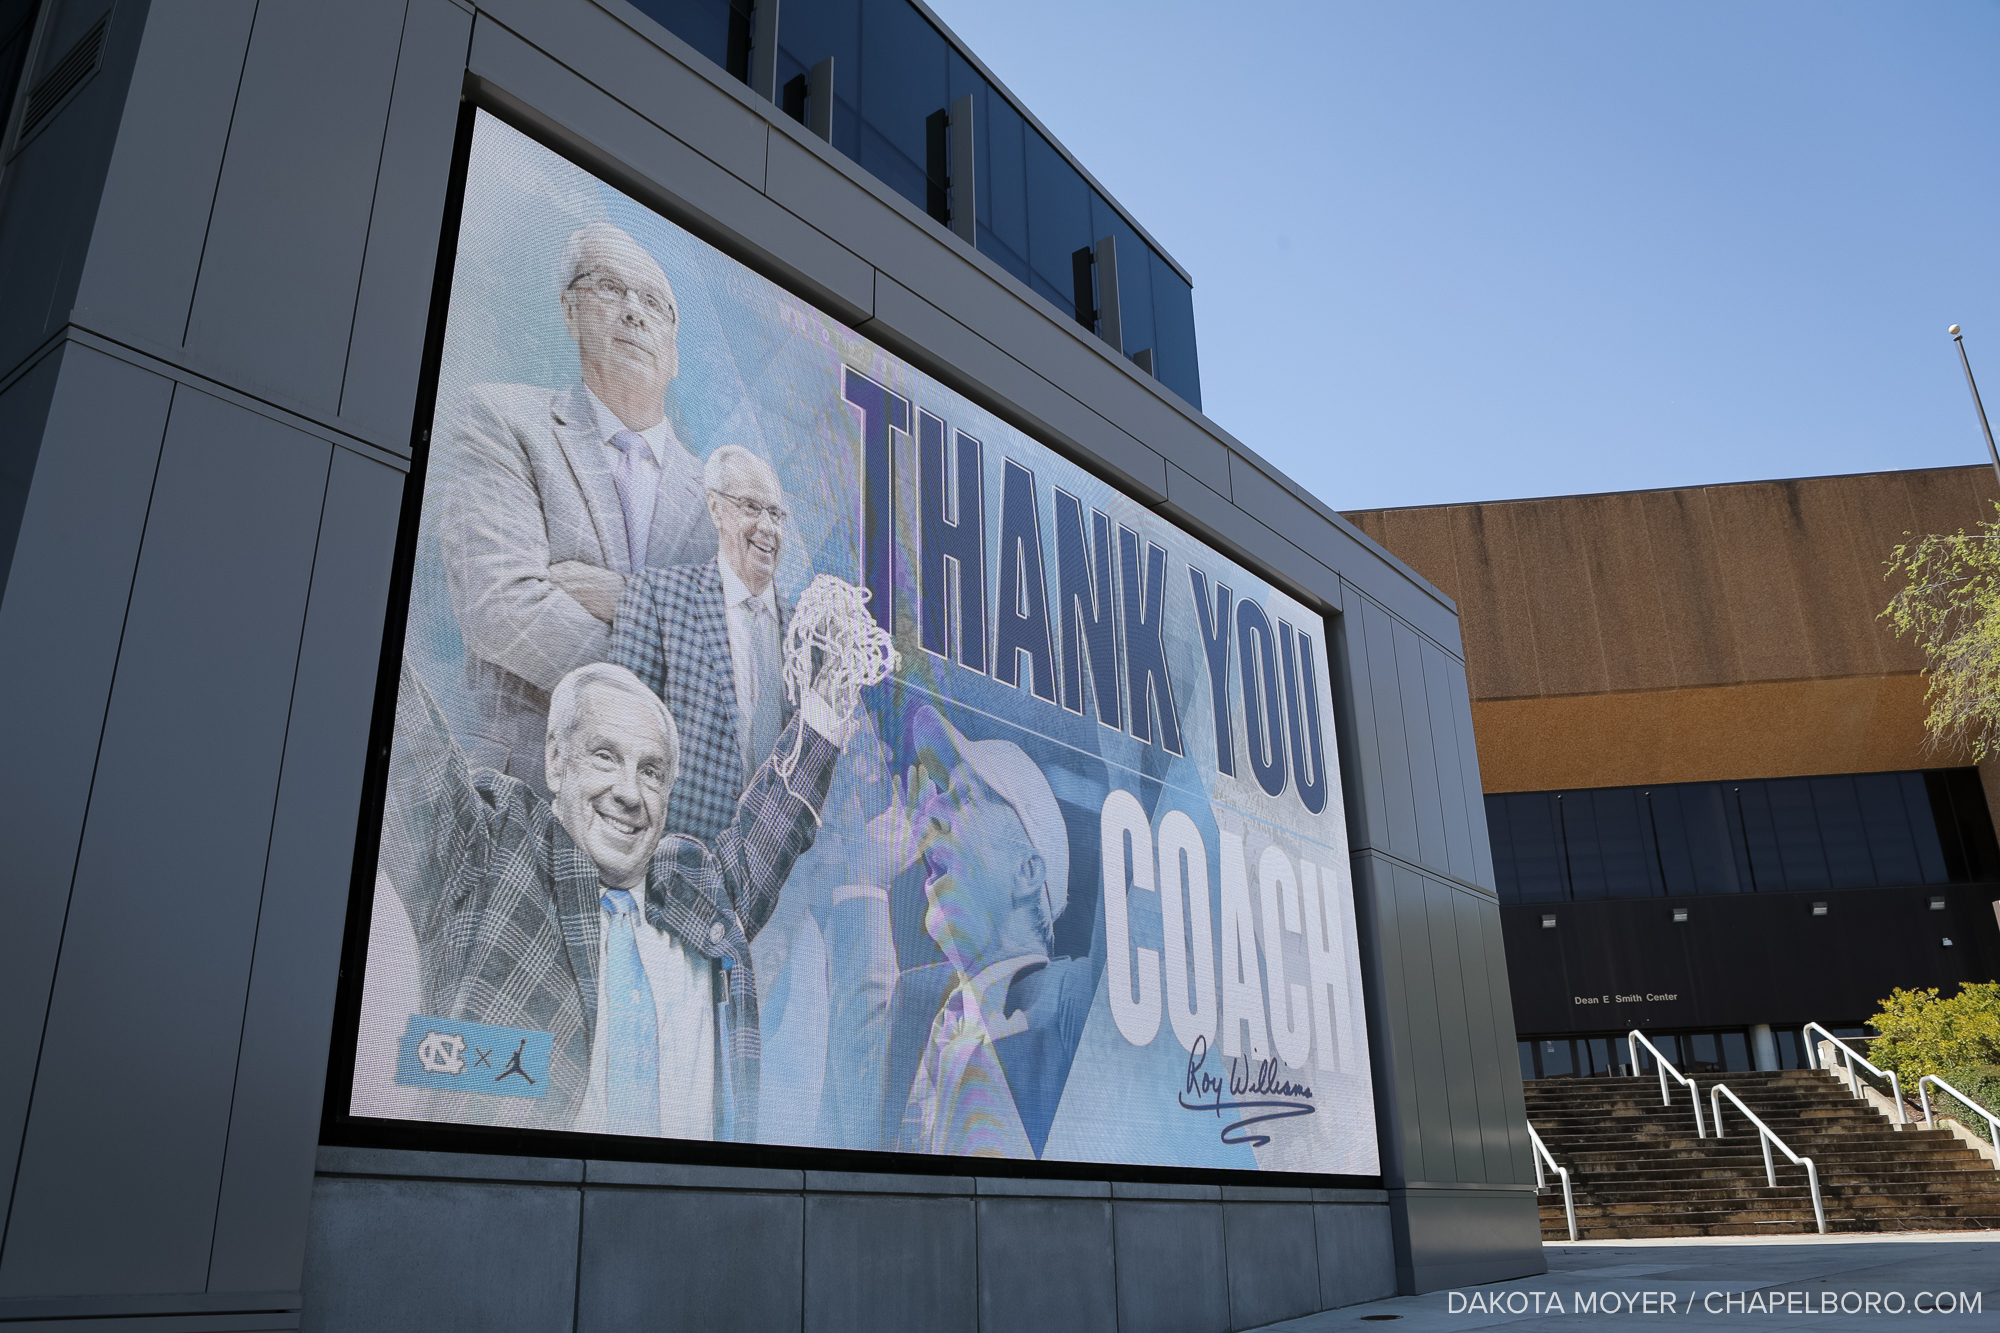 ‘Thank You for Everything’: Fans, Players React on Social Media to Roy Williams’ Retirement